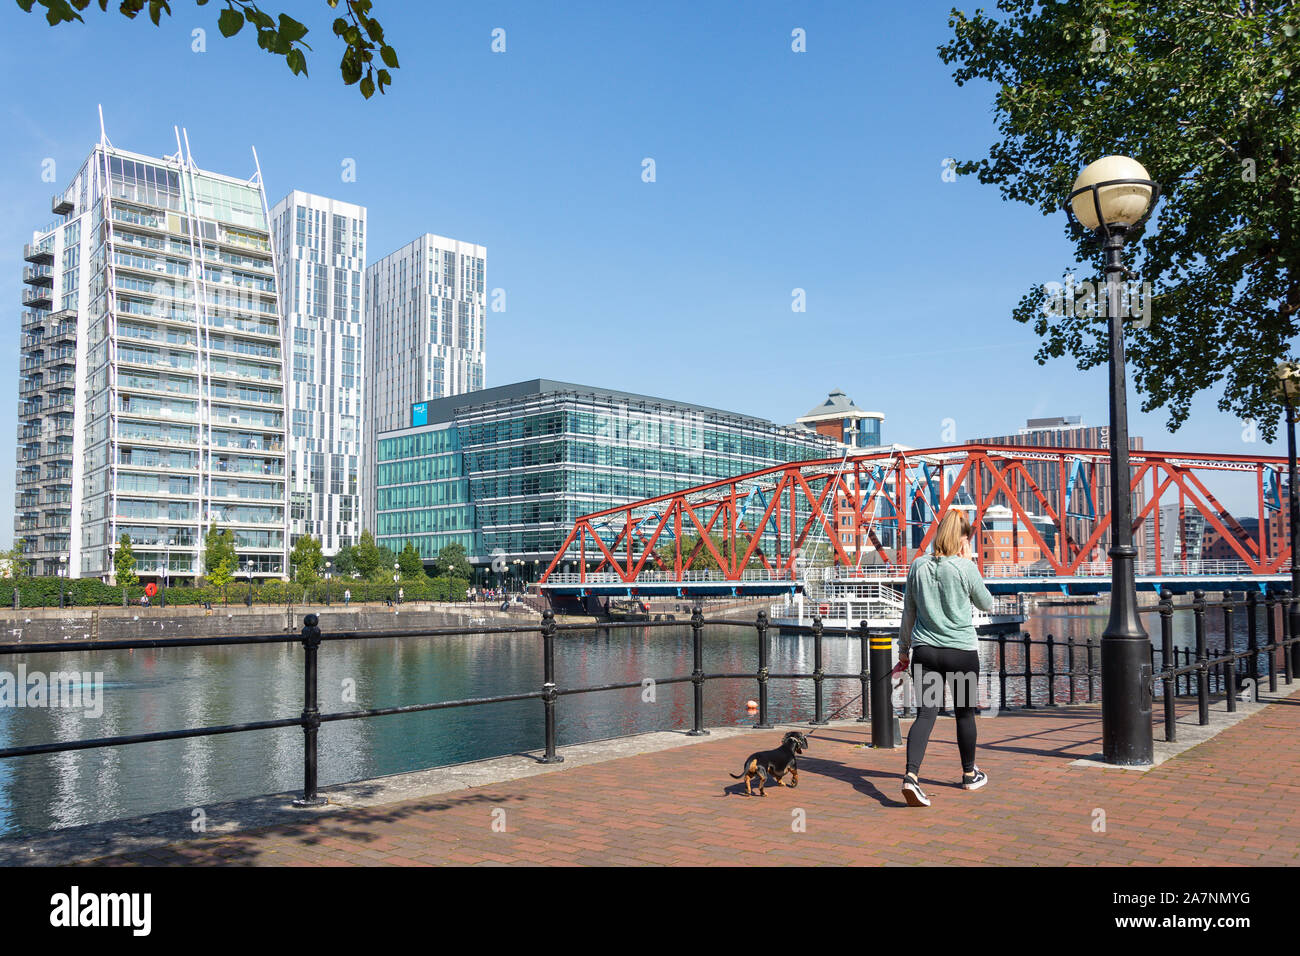 Bassin de Huron, Salford Quays, Salford, Greater Manchester, Angleterre, Royaume-Uni Banque D'Images